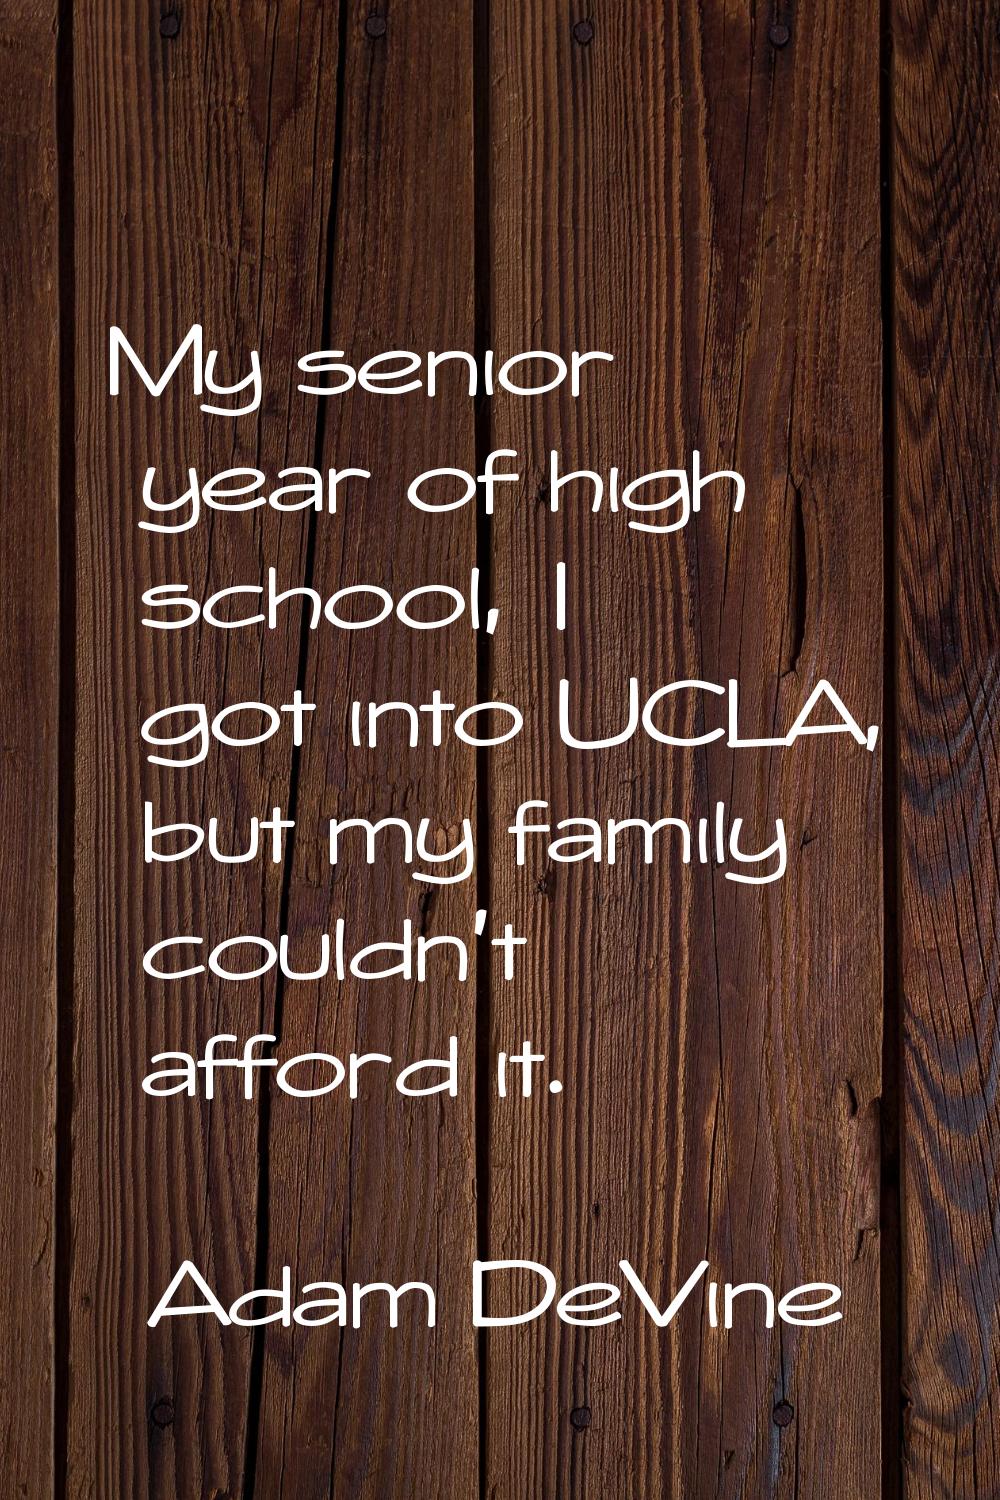 My senior year of high school, I got into UCLA, but my family couldn't afford it.